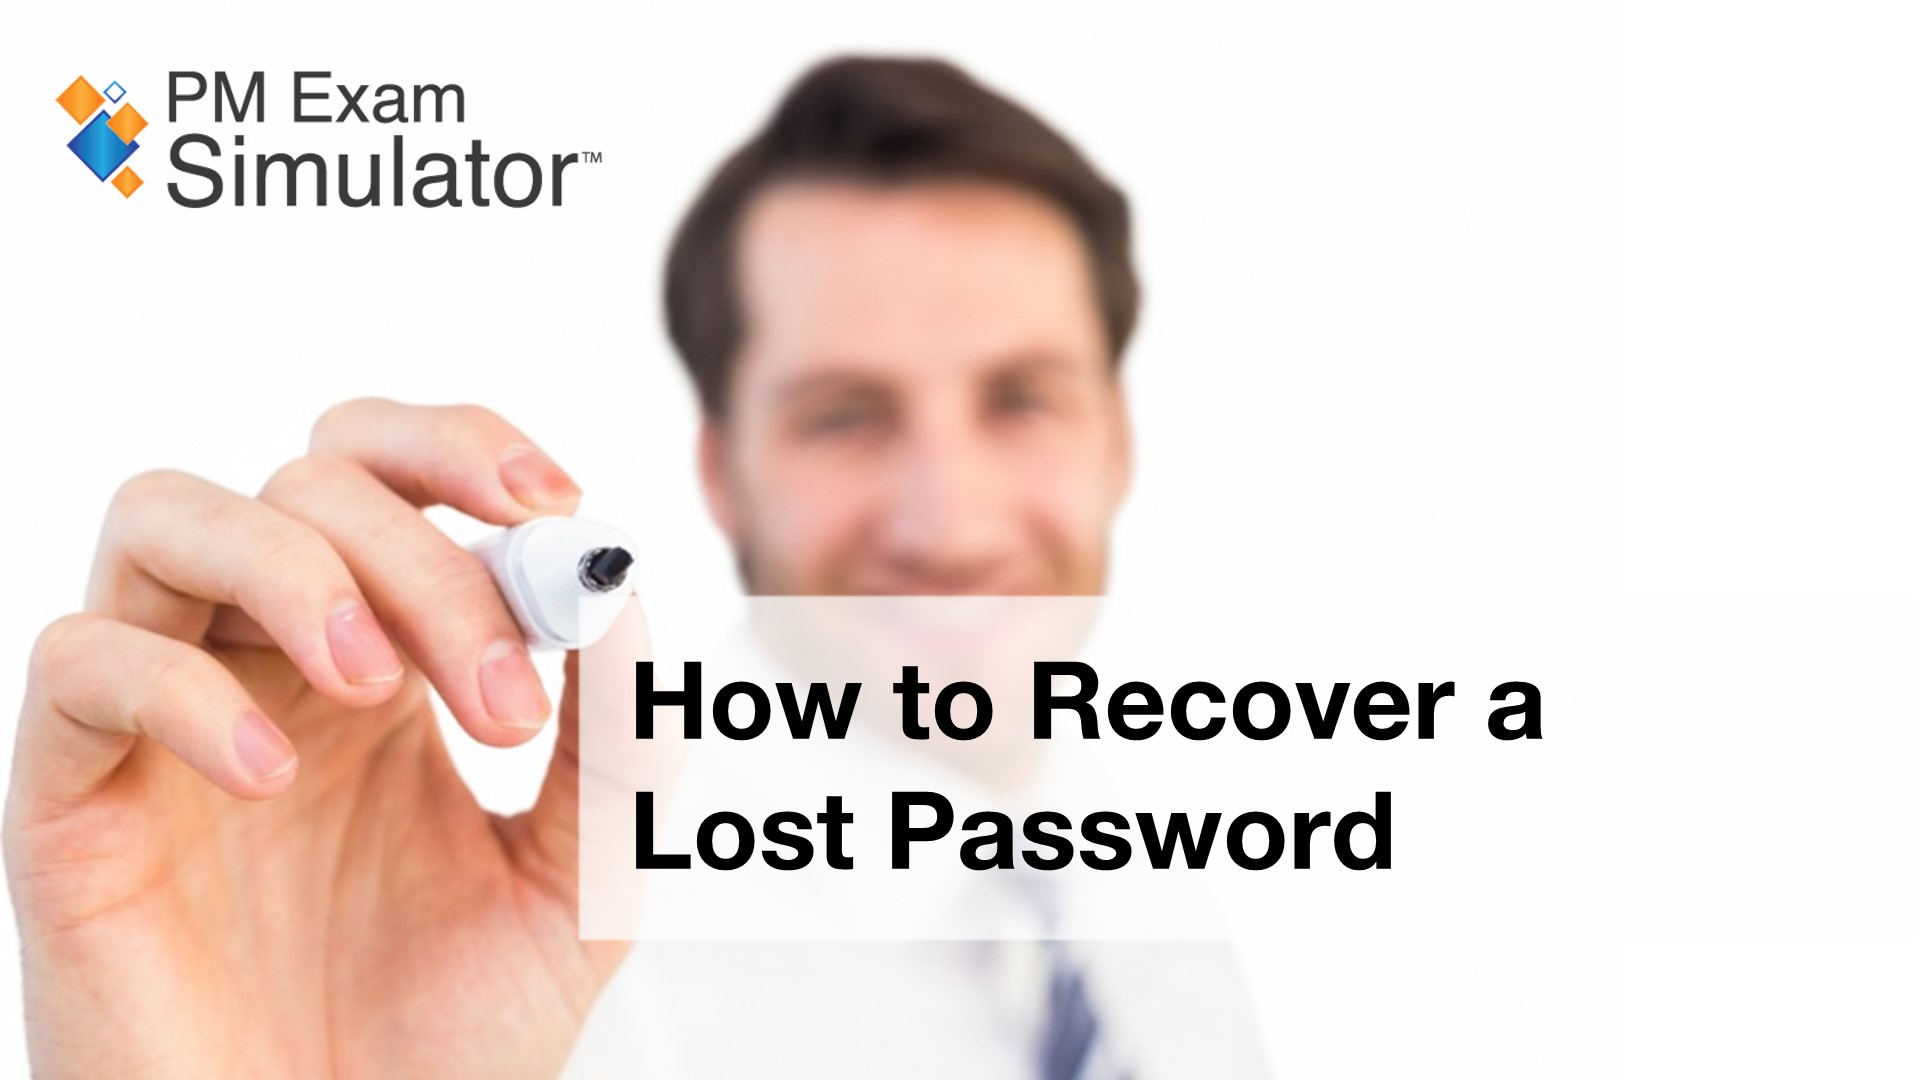 pm_exam_simulator_how_to_recover_the_password_poster.jpg - 141.62 kB